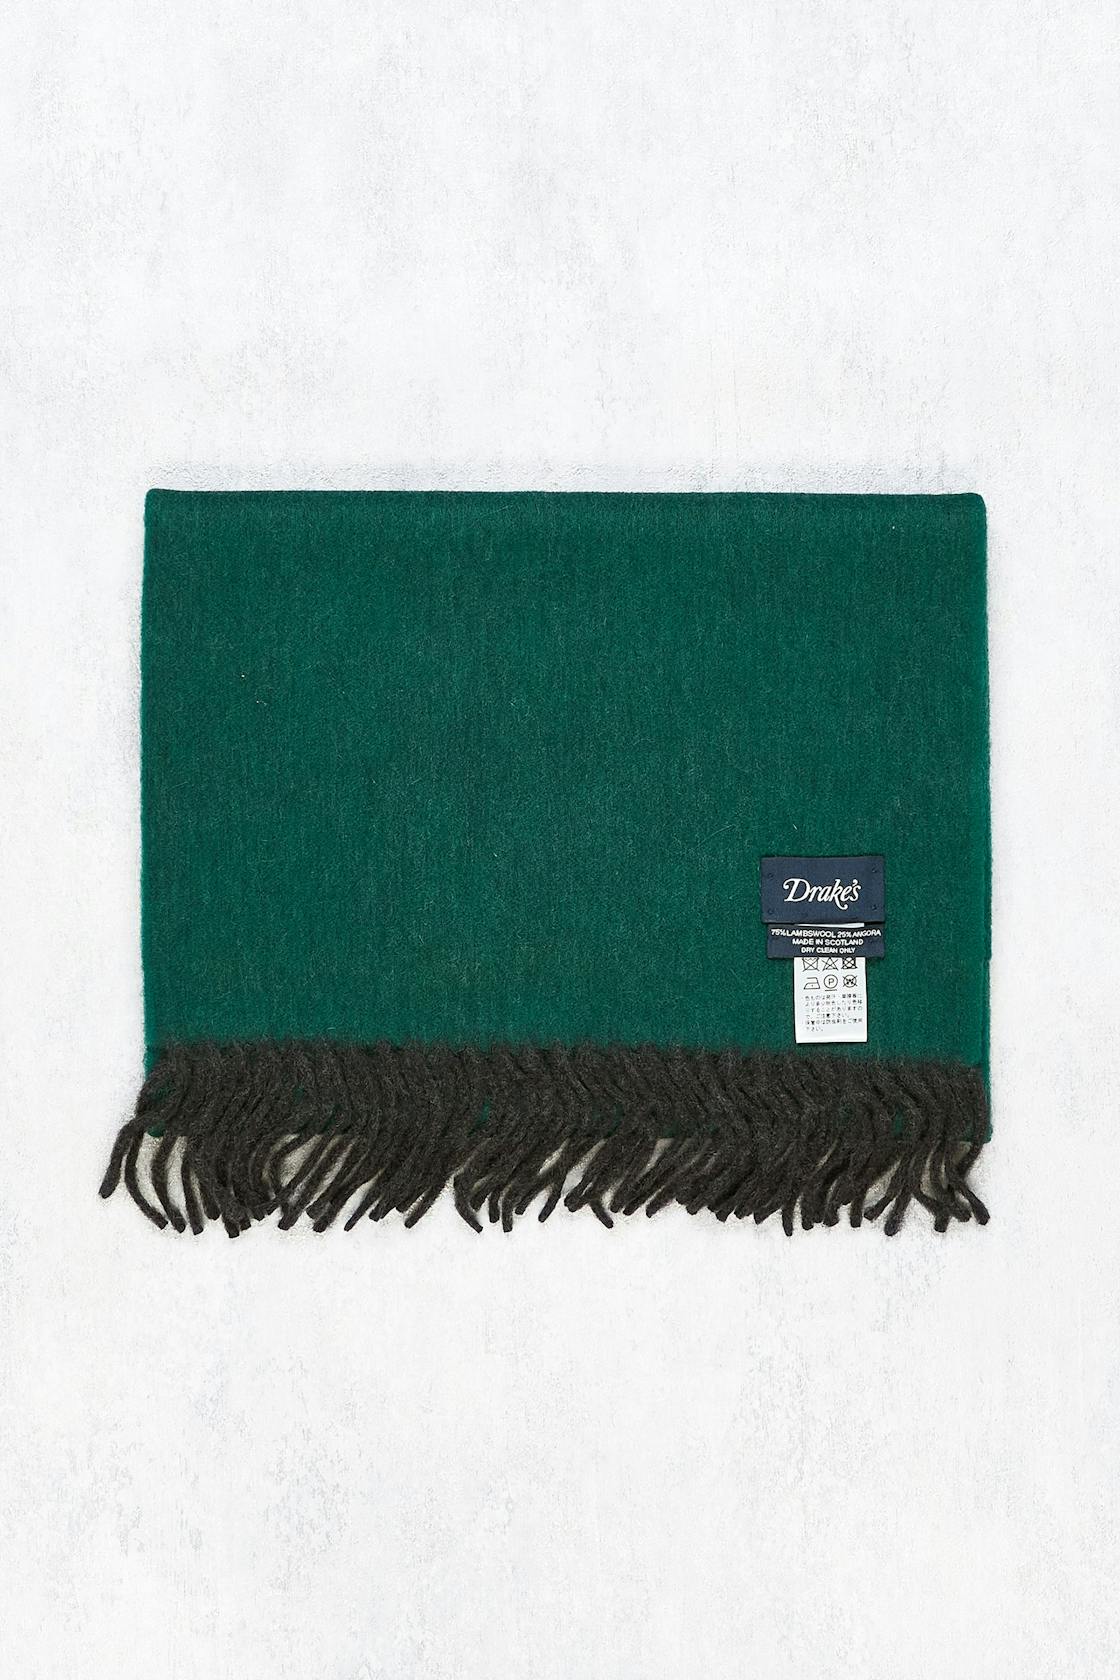 Drake's Green Double-Sided Lambswool/Angora Scarf